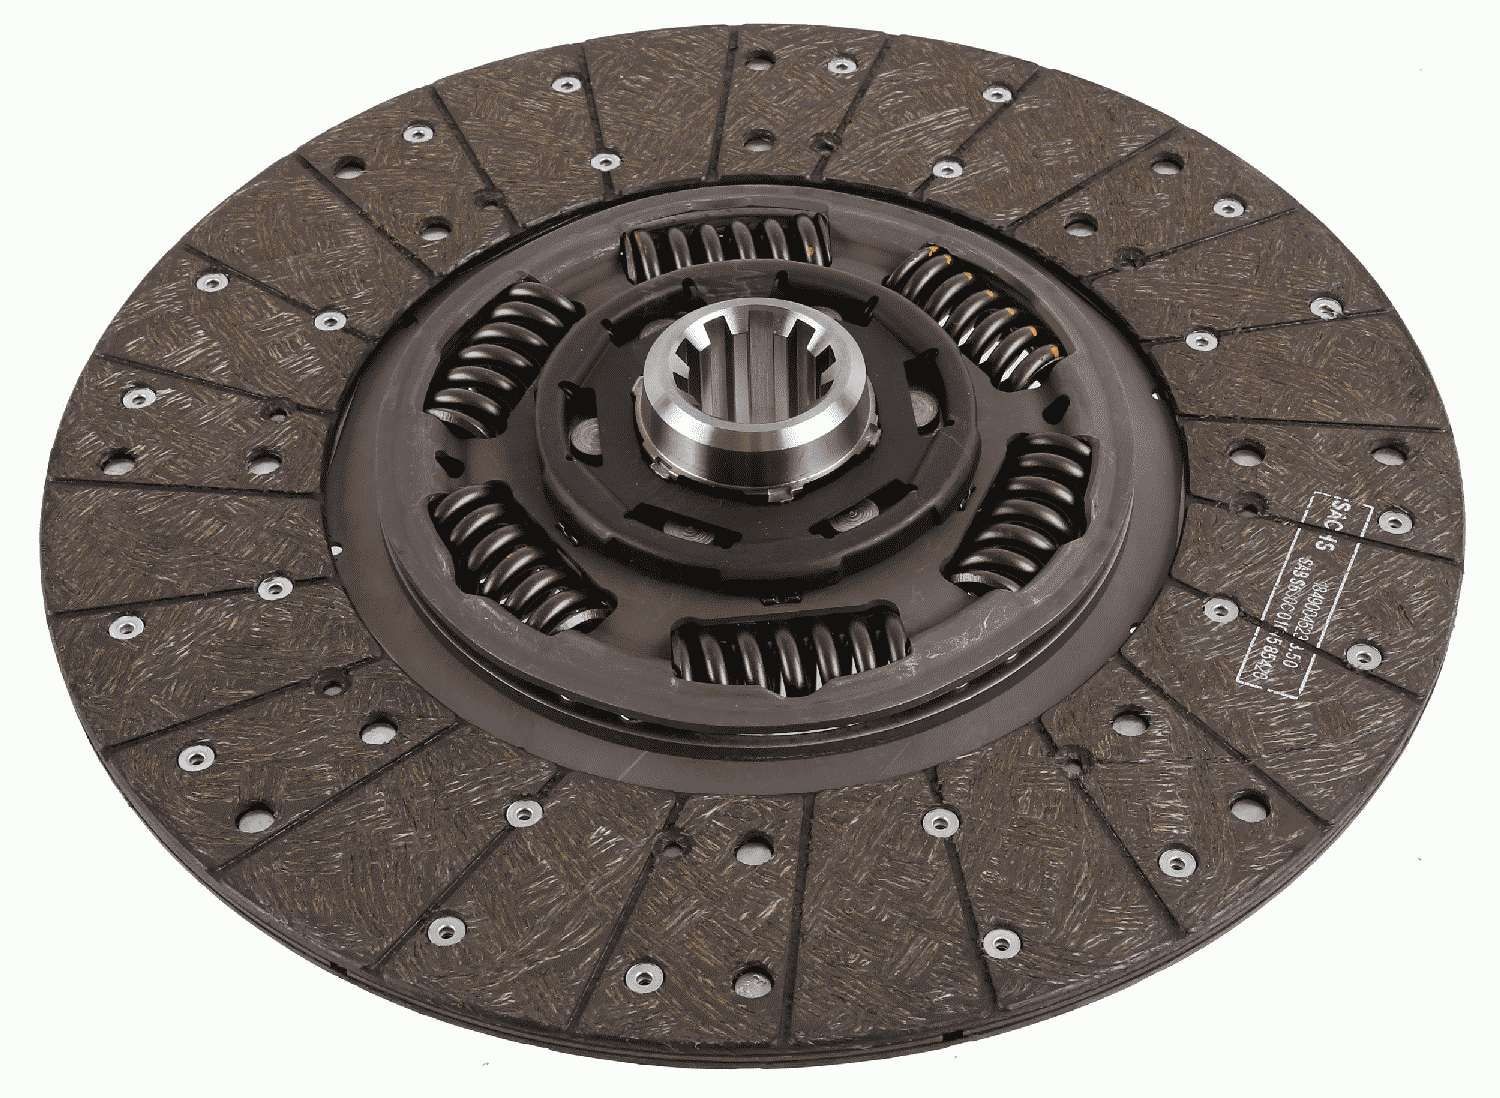 SACHS 1878 009 803 Clutch Disc 395mm, Number of Teeth: 10